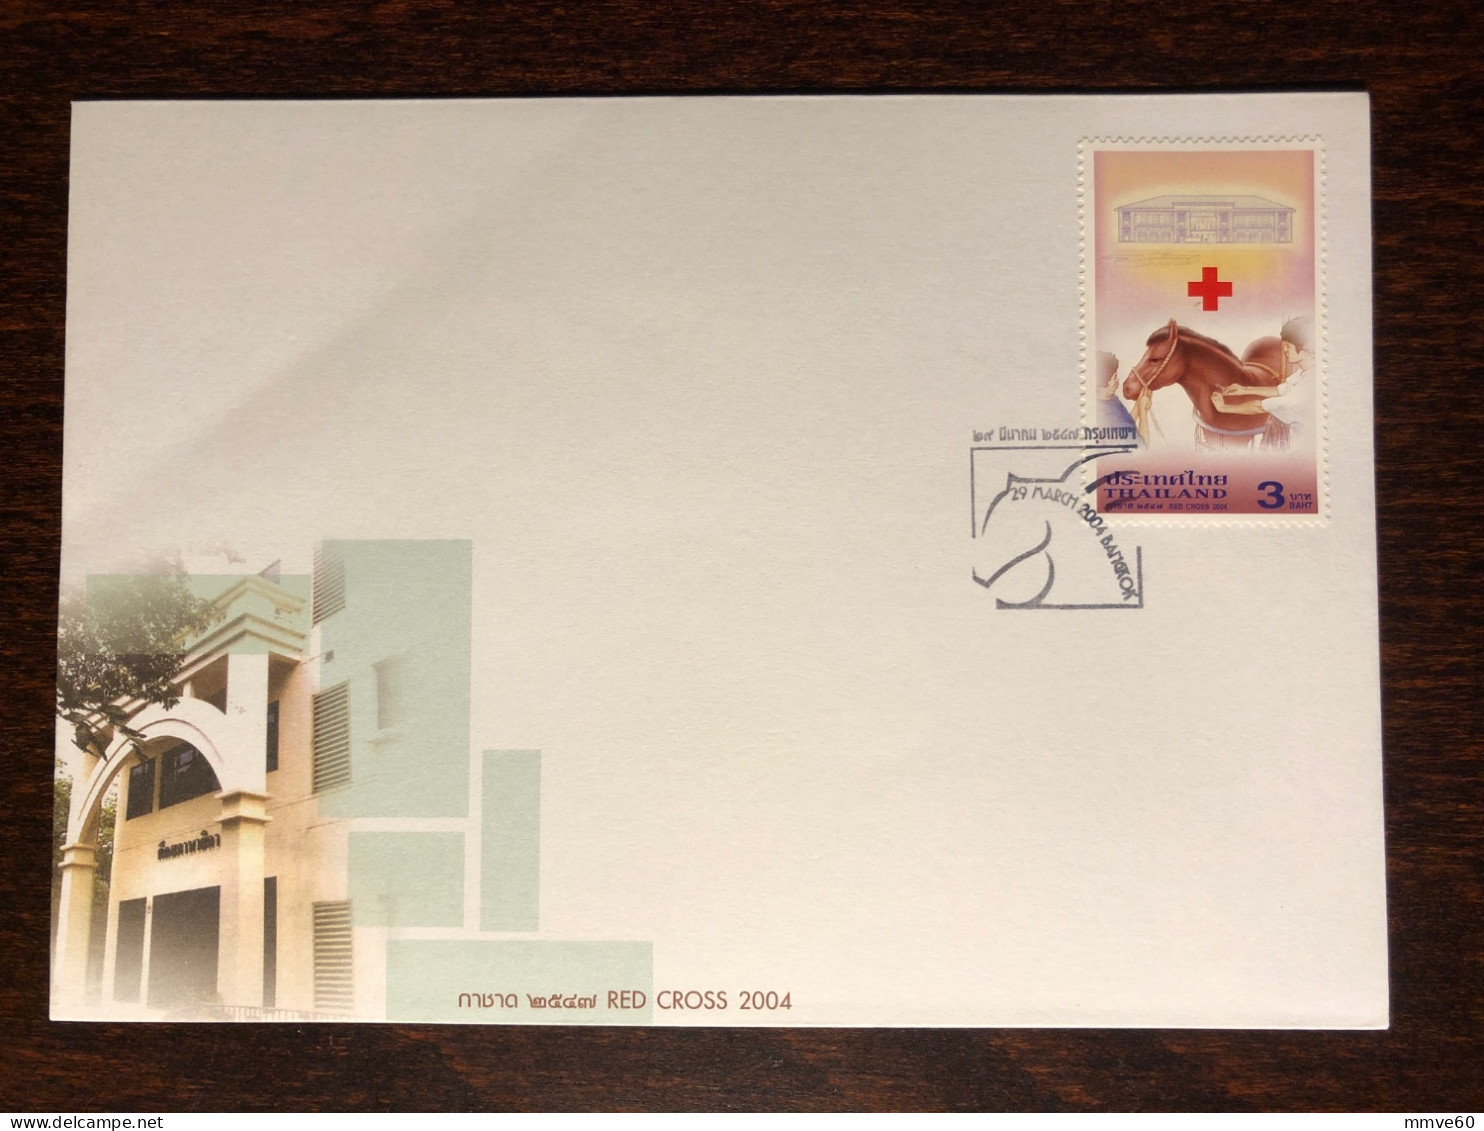 THAILAND FDC COVER 2004 YEAR RED CROSS HEALTH MEDICINE STAMPS - Tailandia